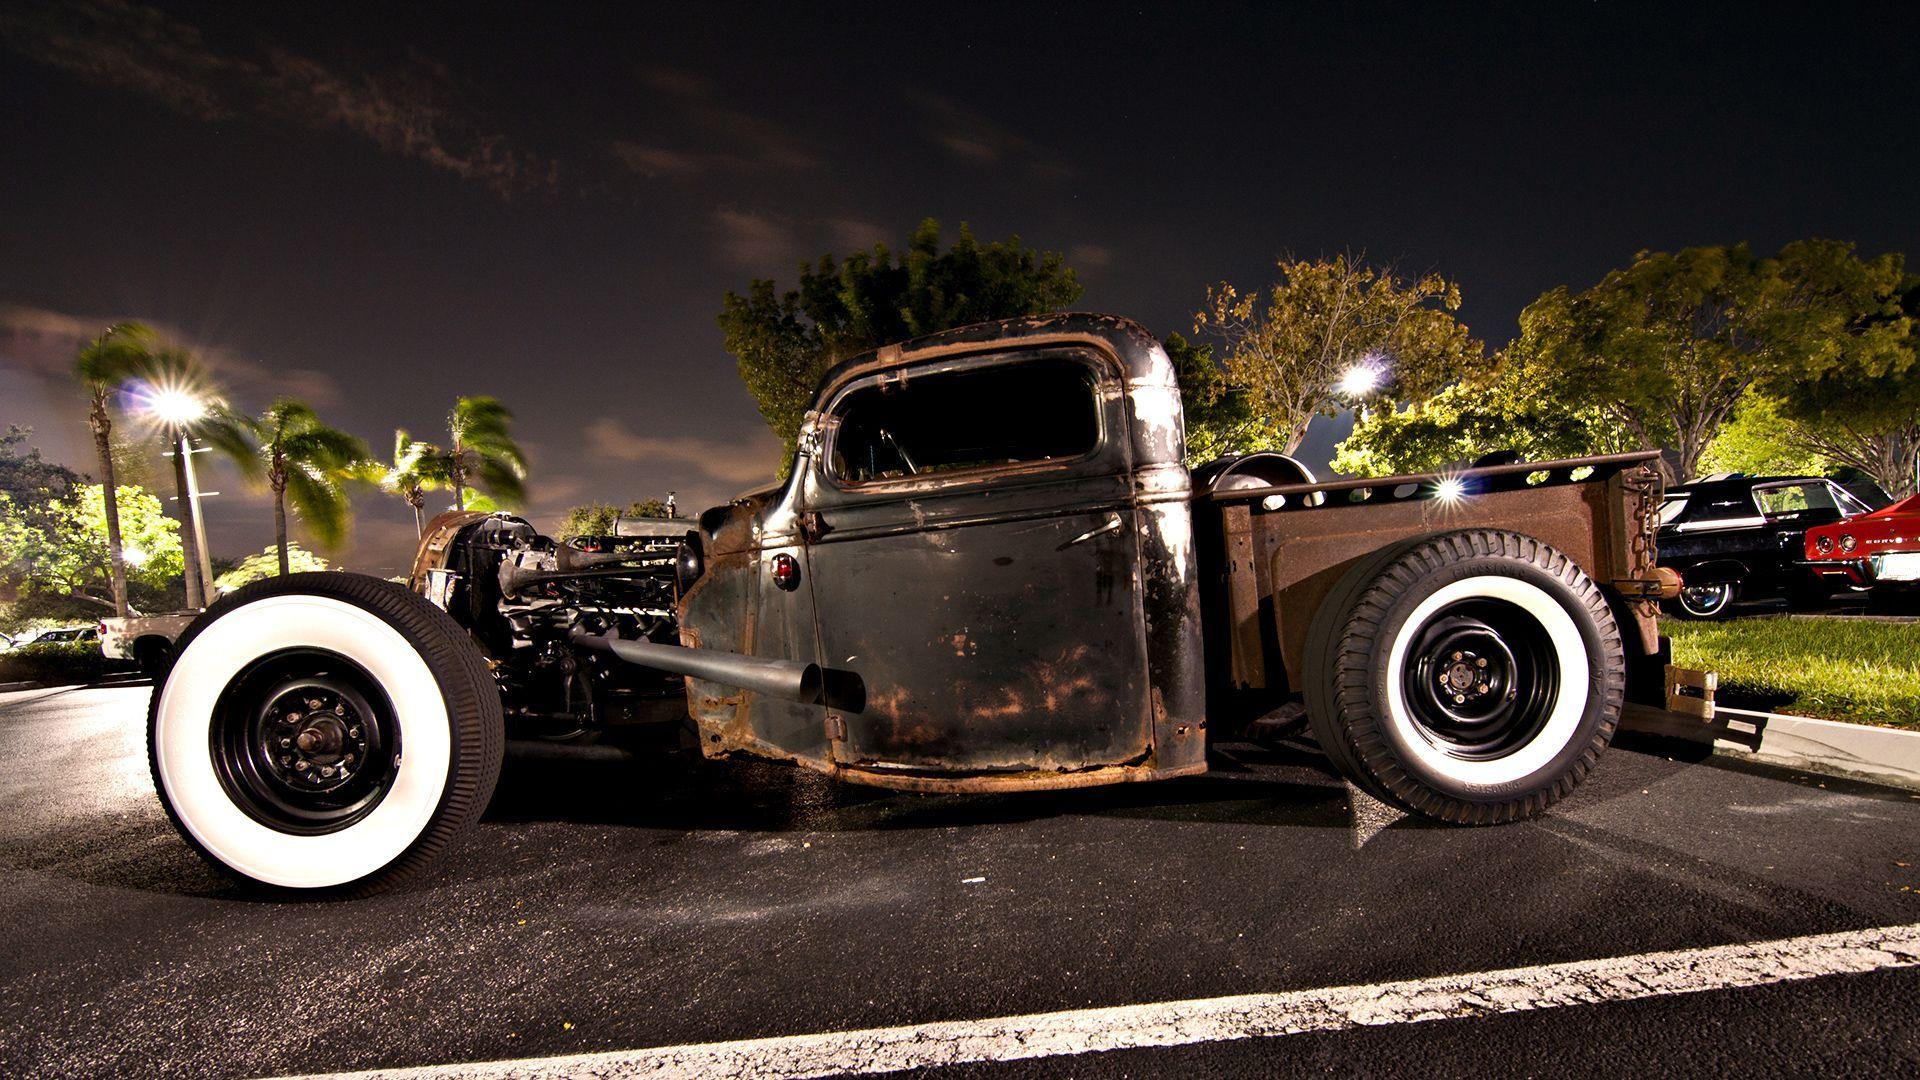 35+ Street Rod Cars And Truck Wallpaper For Pc HD download